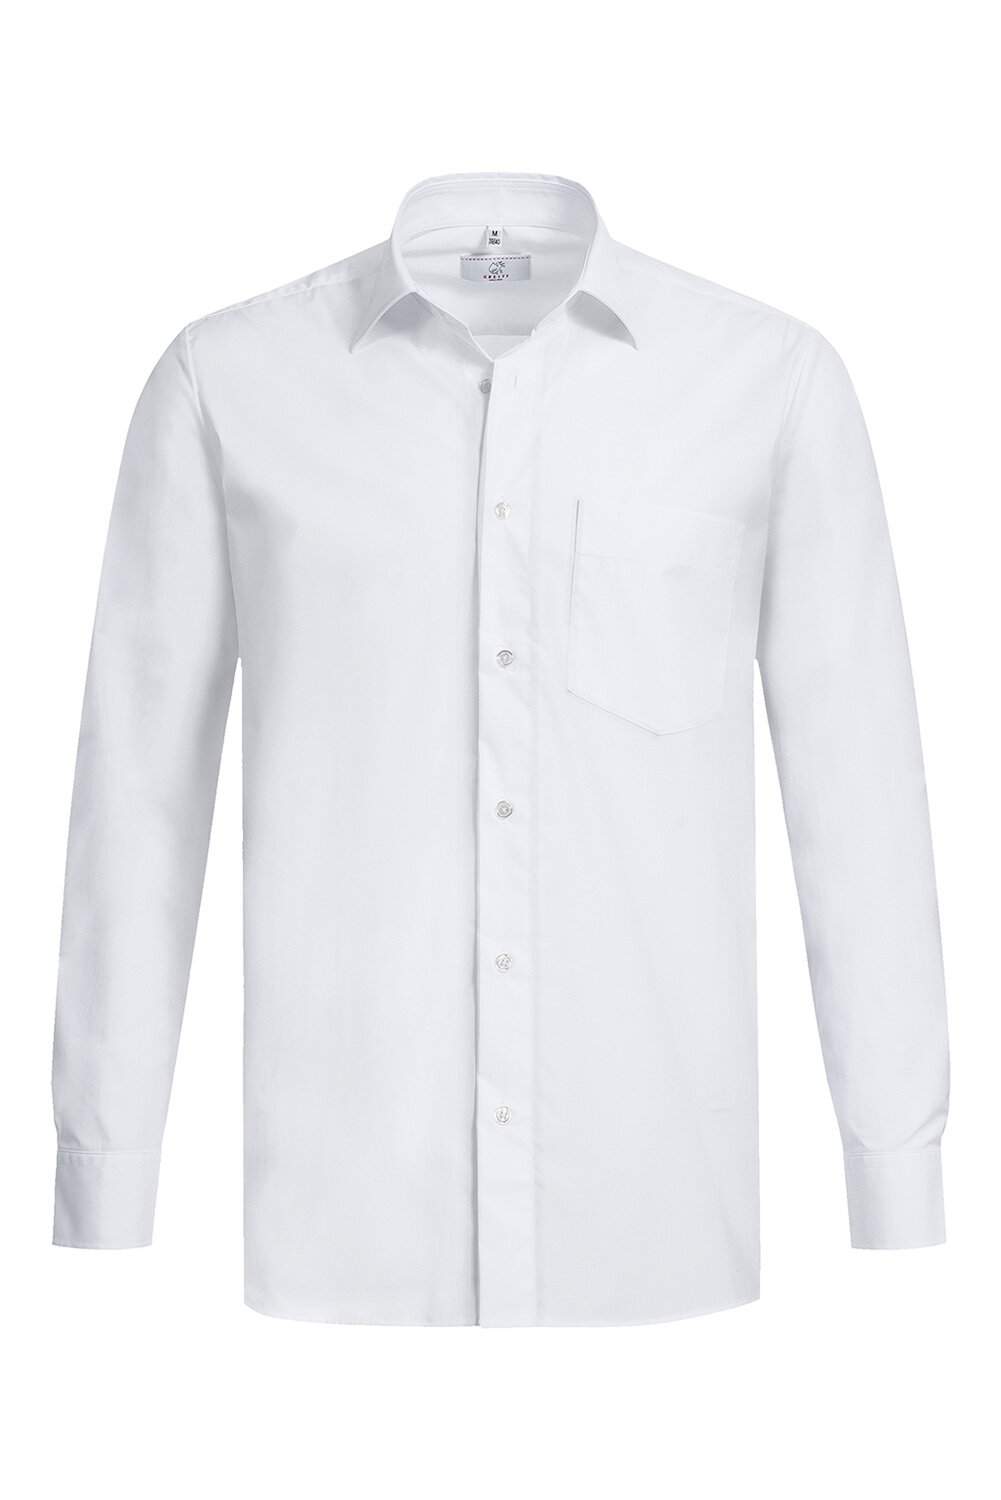 Chemise homme manches longues, blanche ...